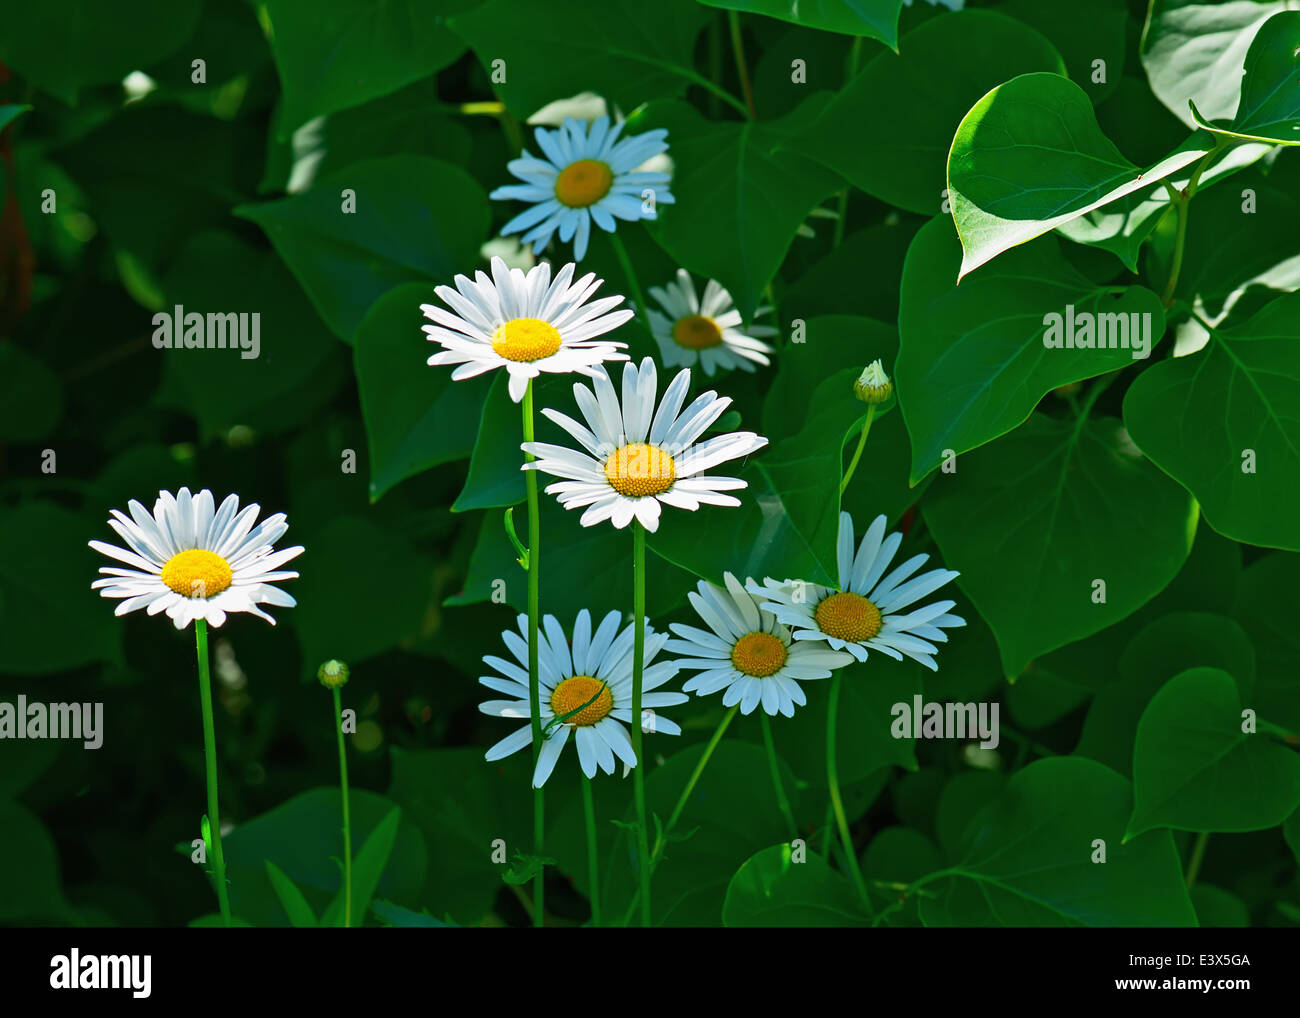 Green flowering meadow with white daisies. Natural background. Stock Photo